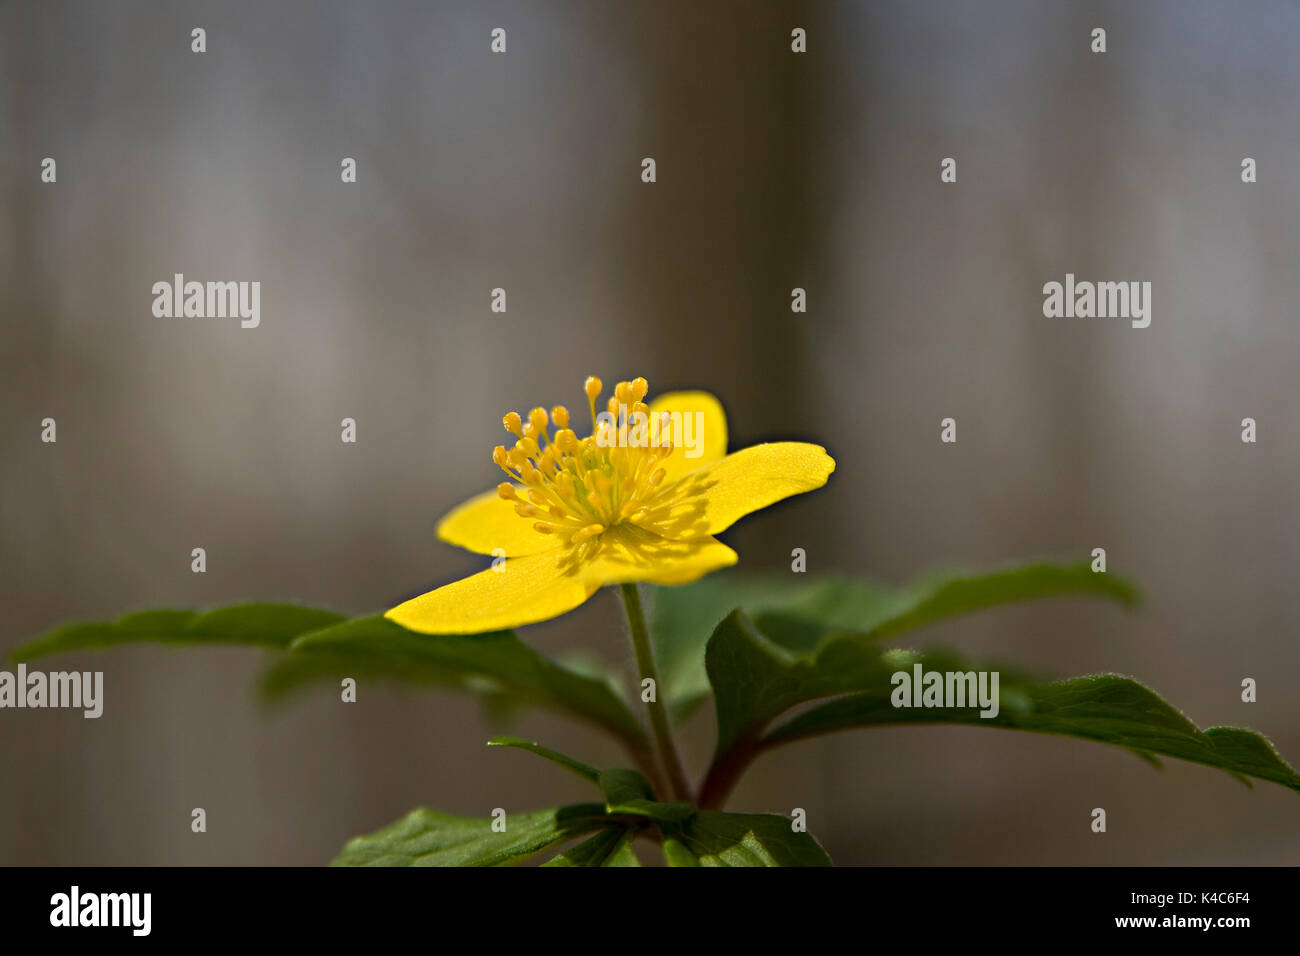 Anemone Ranunculoides, Flowering Yellow Windthroat Isolated Against Brown Background Stock Photo